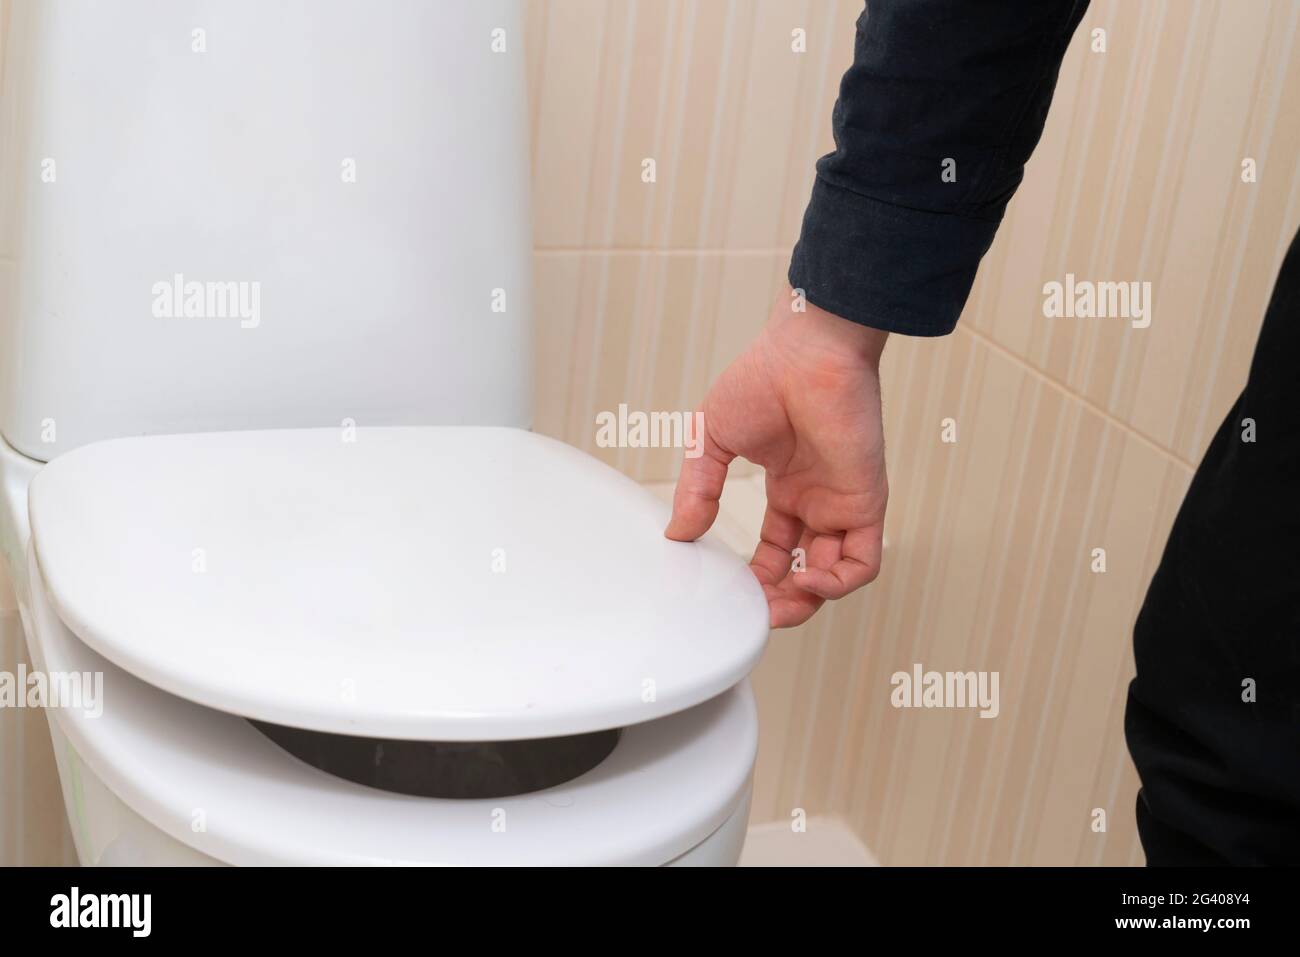 Toilet Bowl With Lid Open Stock Photo, Picture and Royalty Free Image.  Image 39379069.